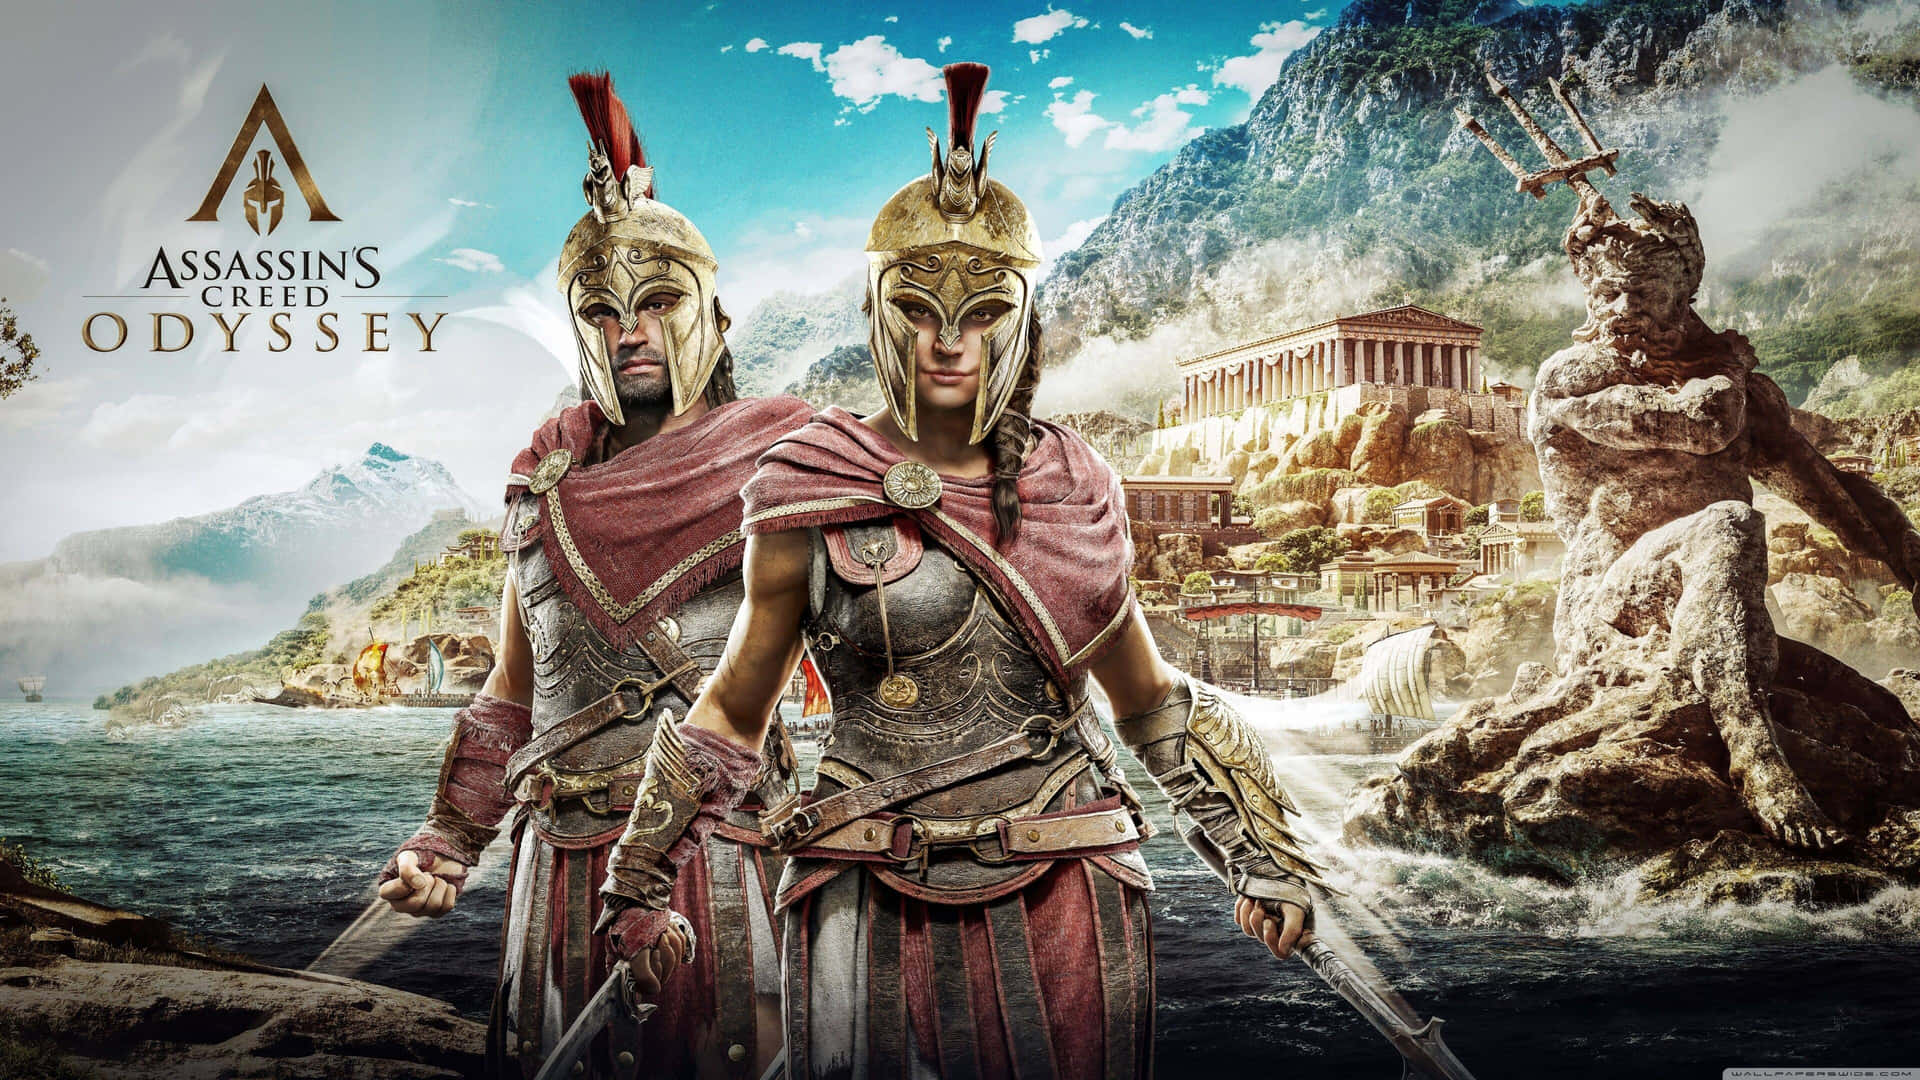 Explore Ancient Greece in 4K with Assassin's Creed Odyssey